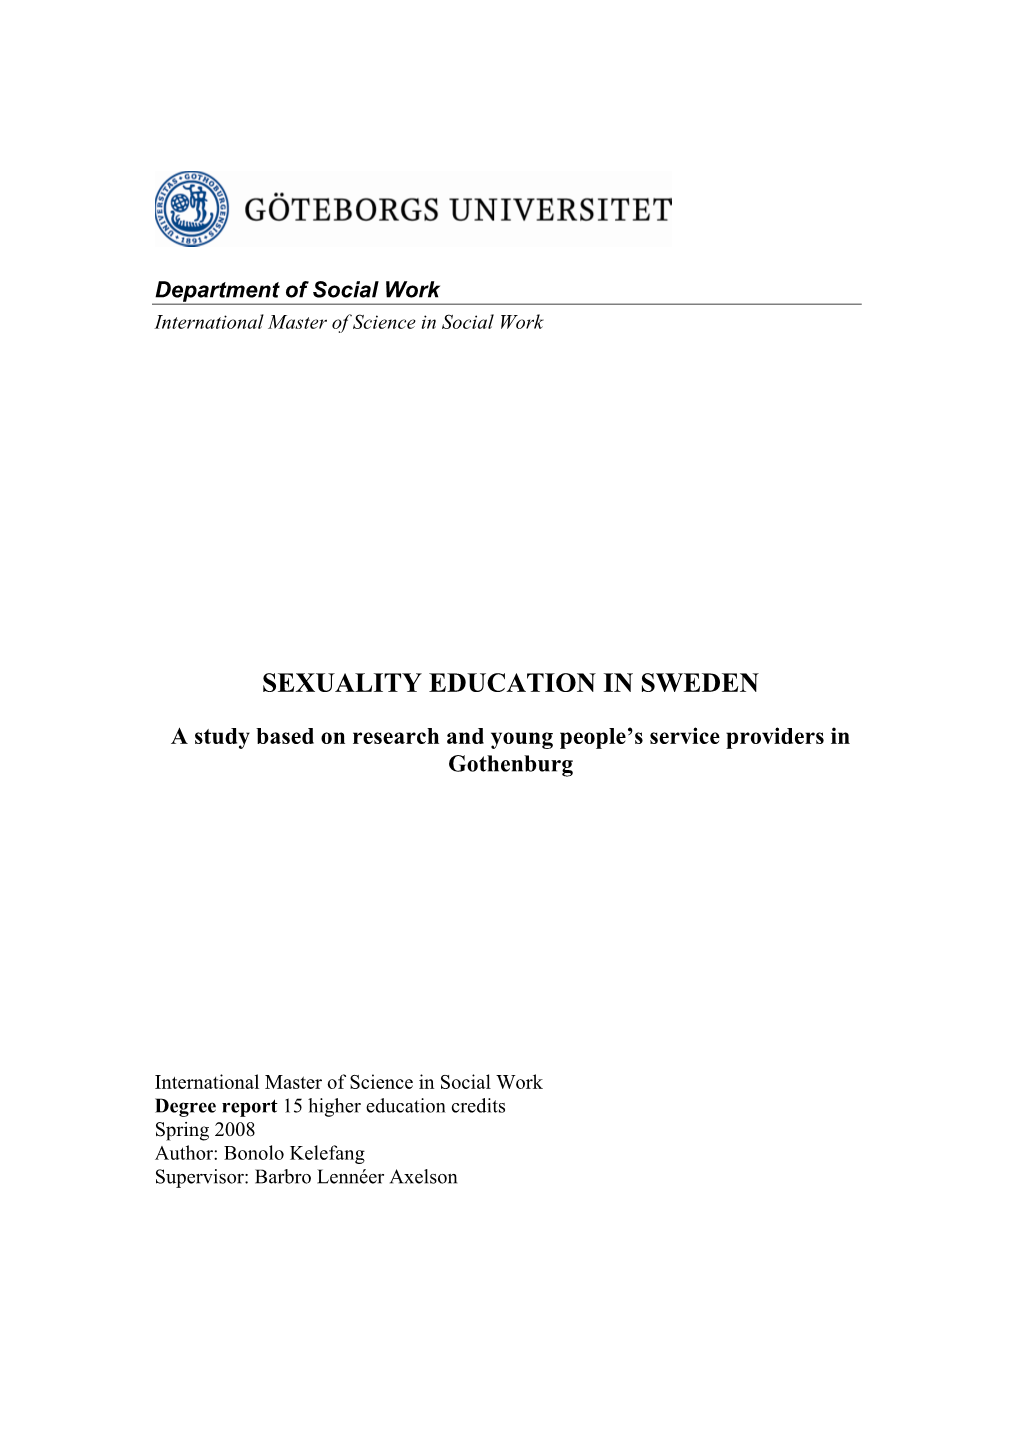 Sexuality Education in Sweden